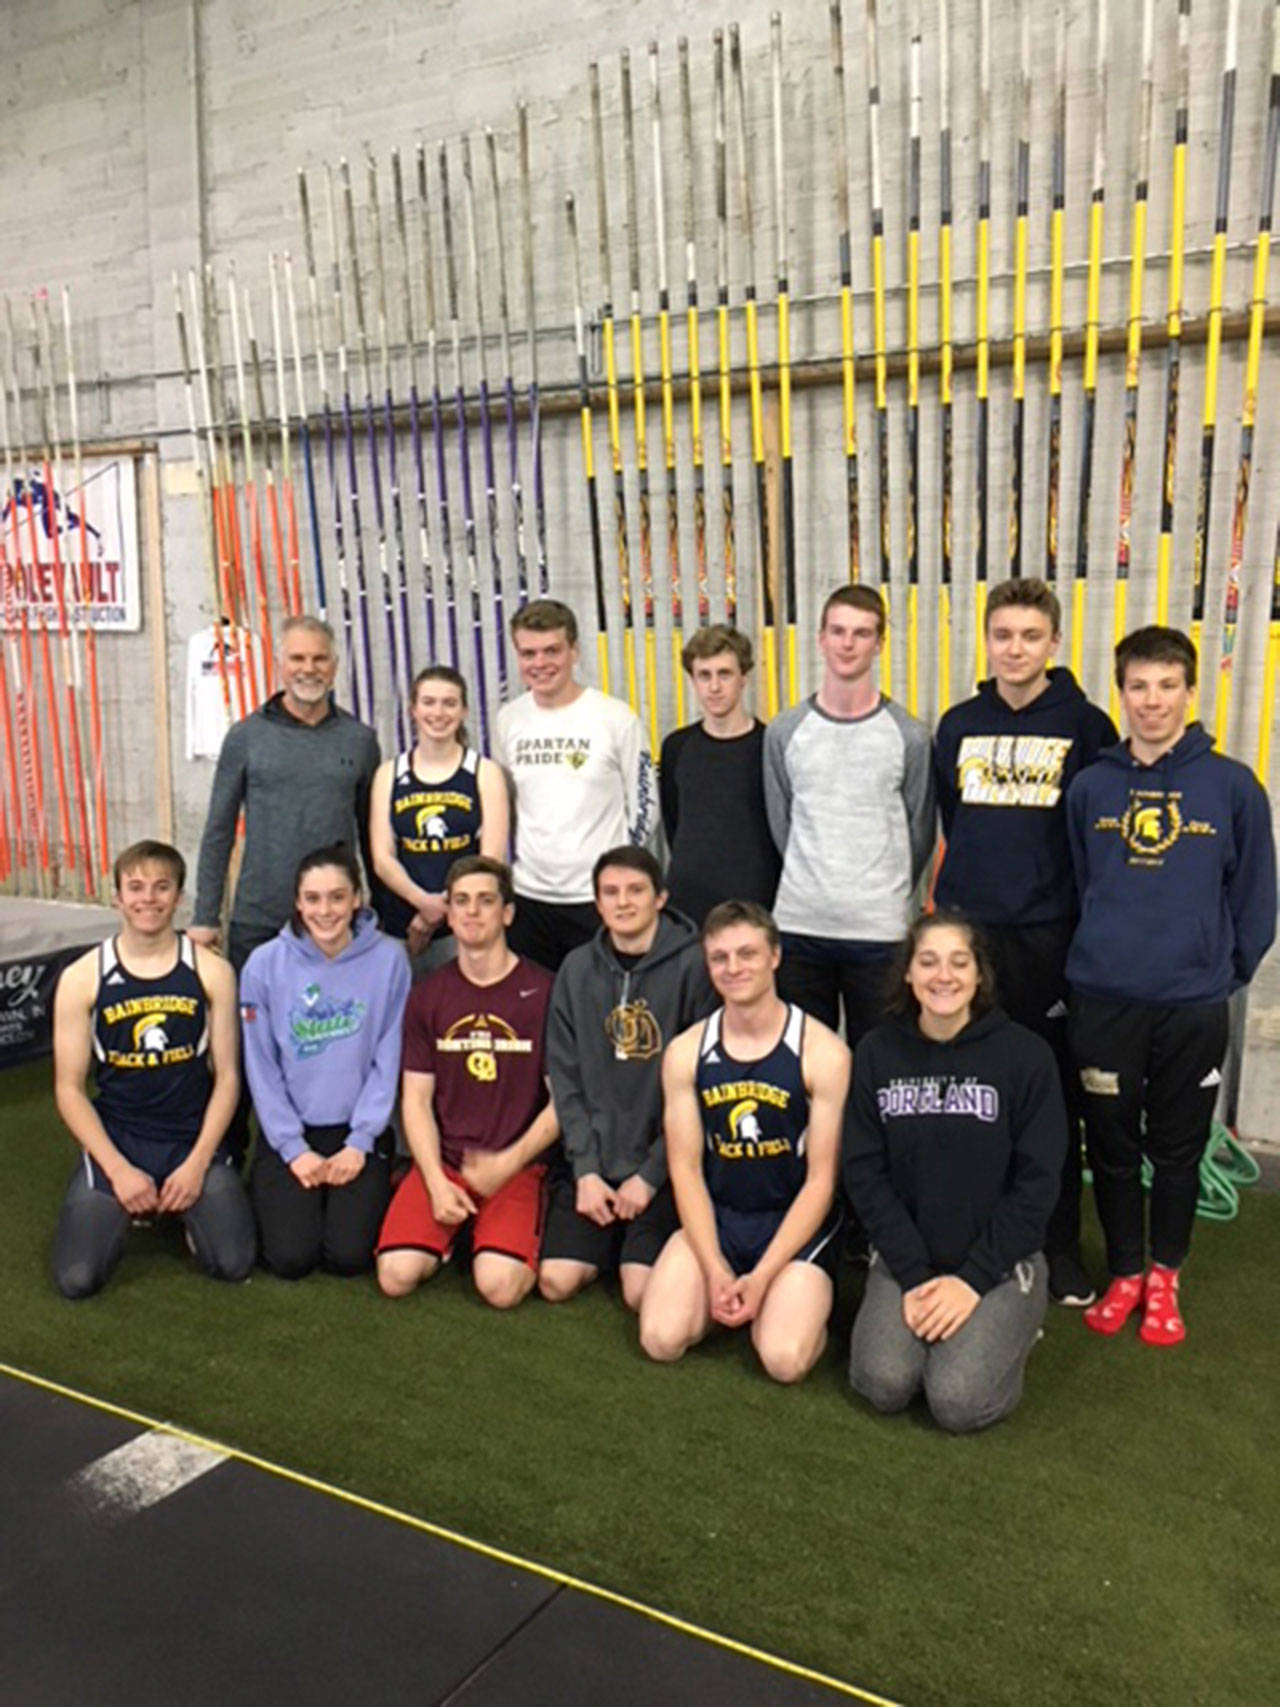 Photo courtesy of John Bierly | Bainbridge High School track and field team pole vault coach John Bierly, top left, stands with the pole vault squad, several of whom lead in the Metro standings and are predicted to have strong showings at State.